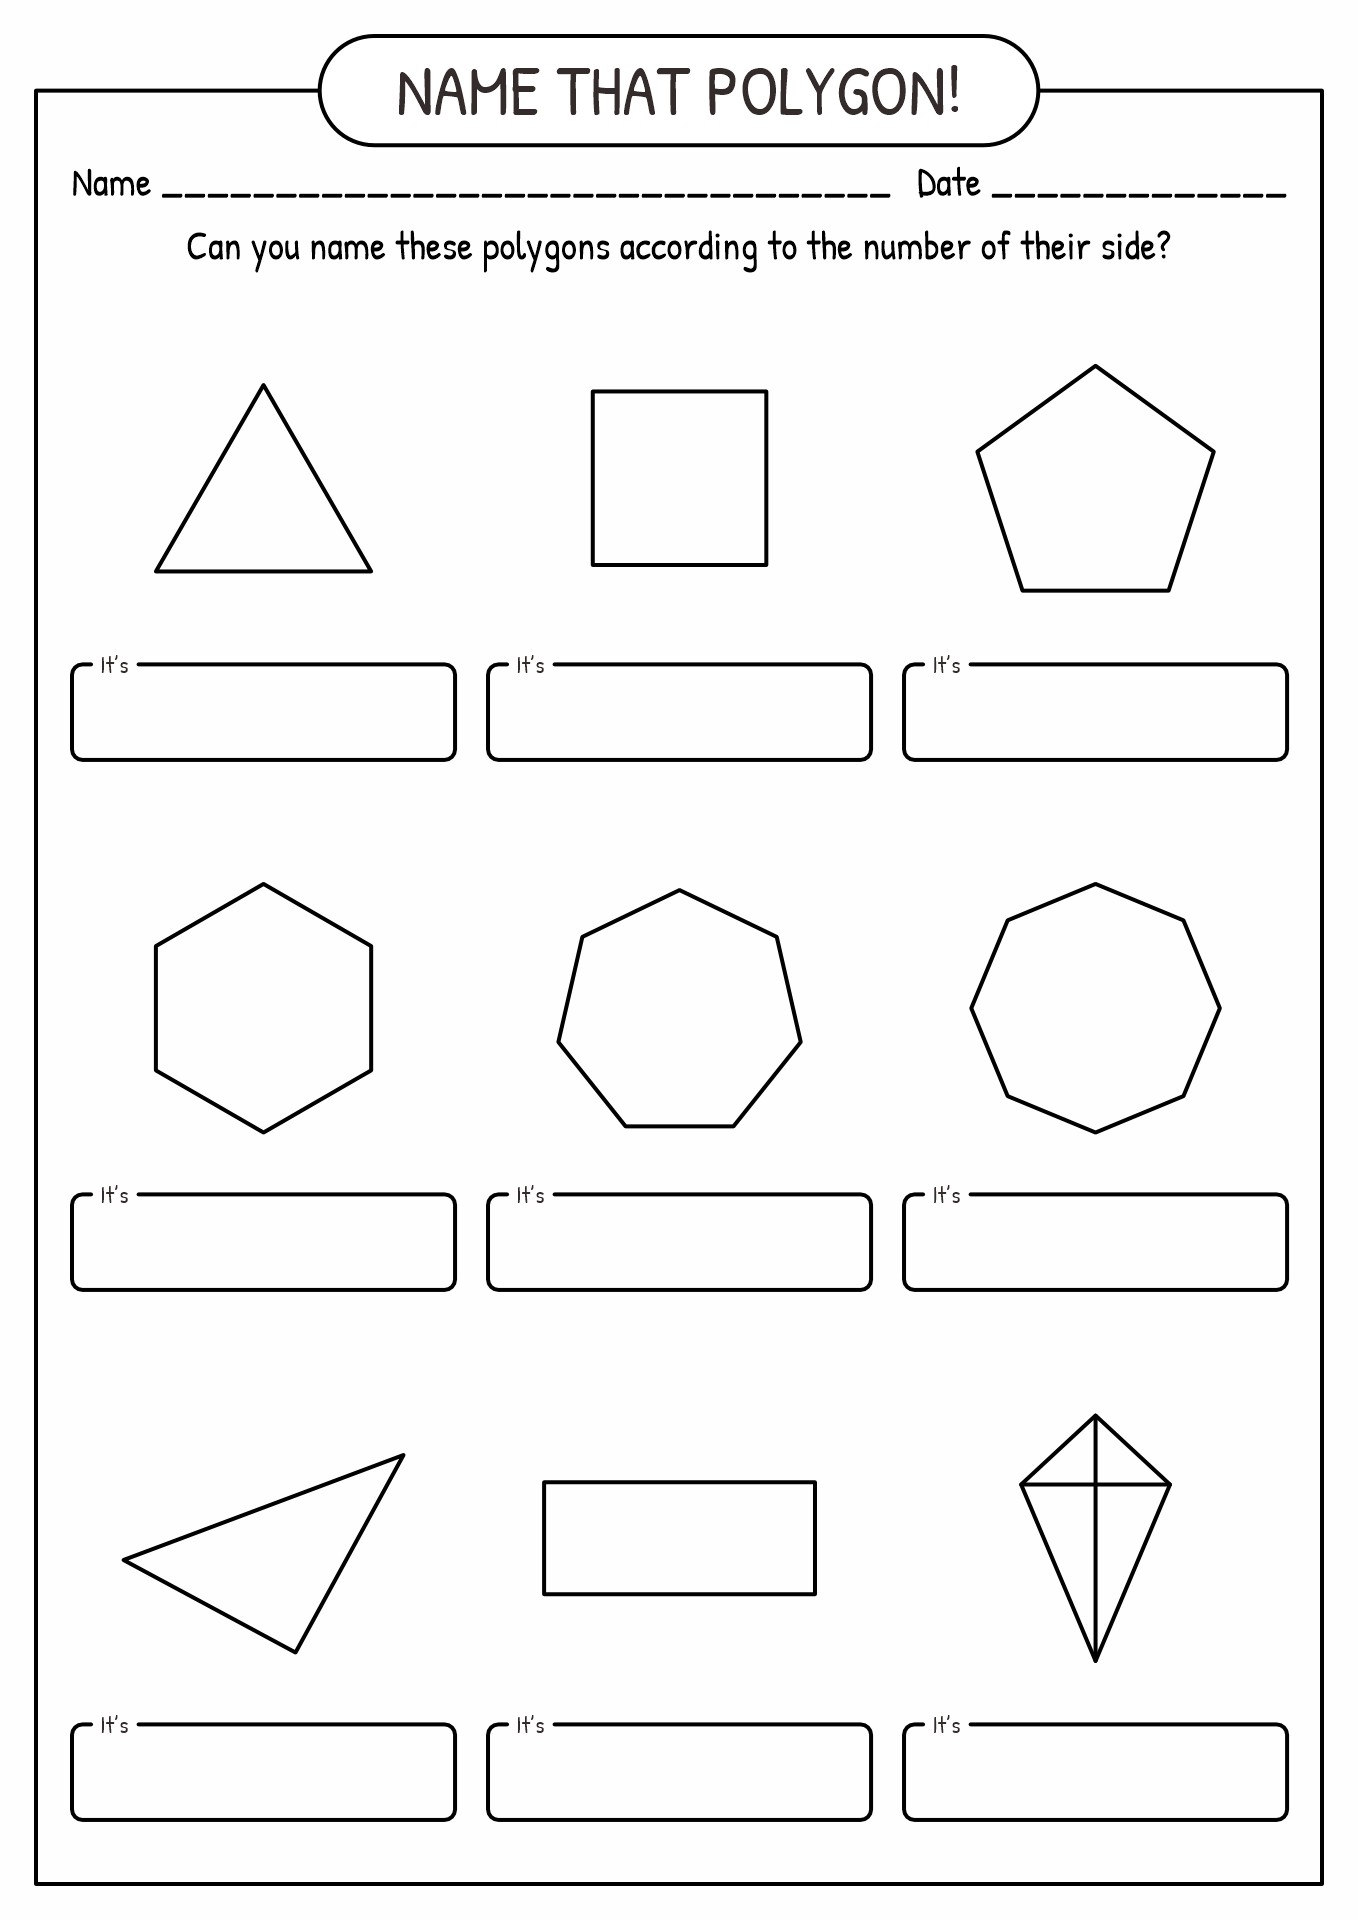 All Polygon Shapes and Names